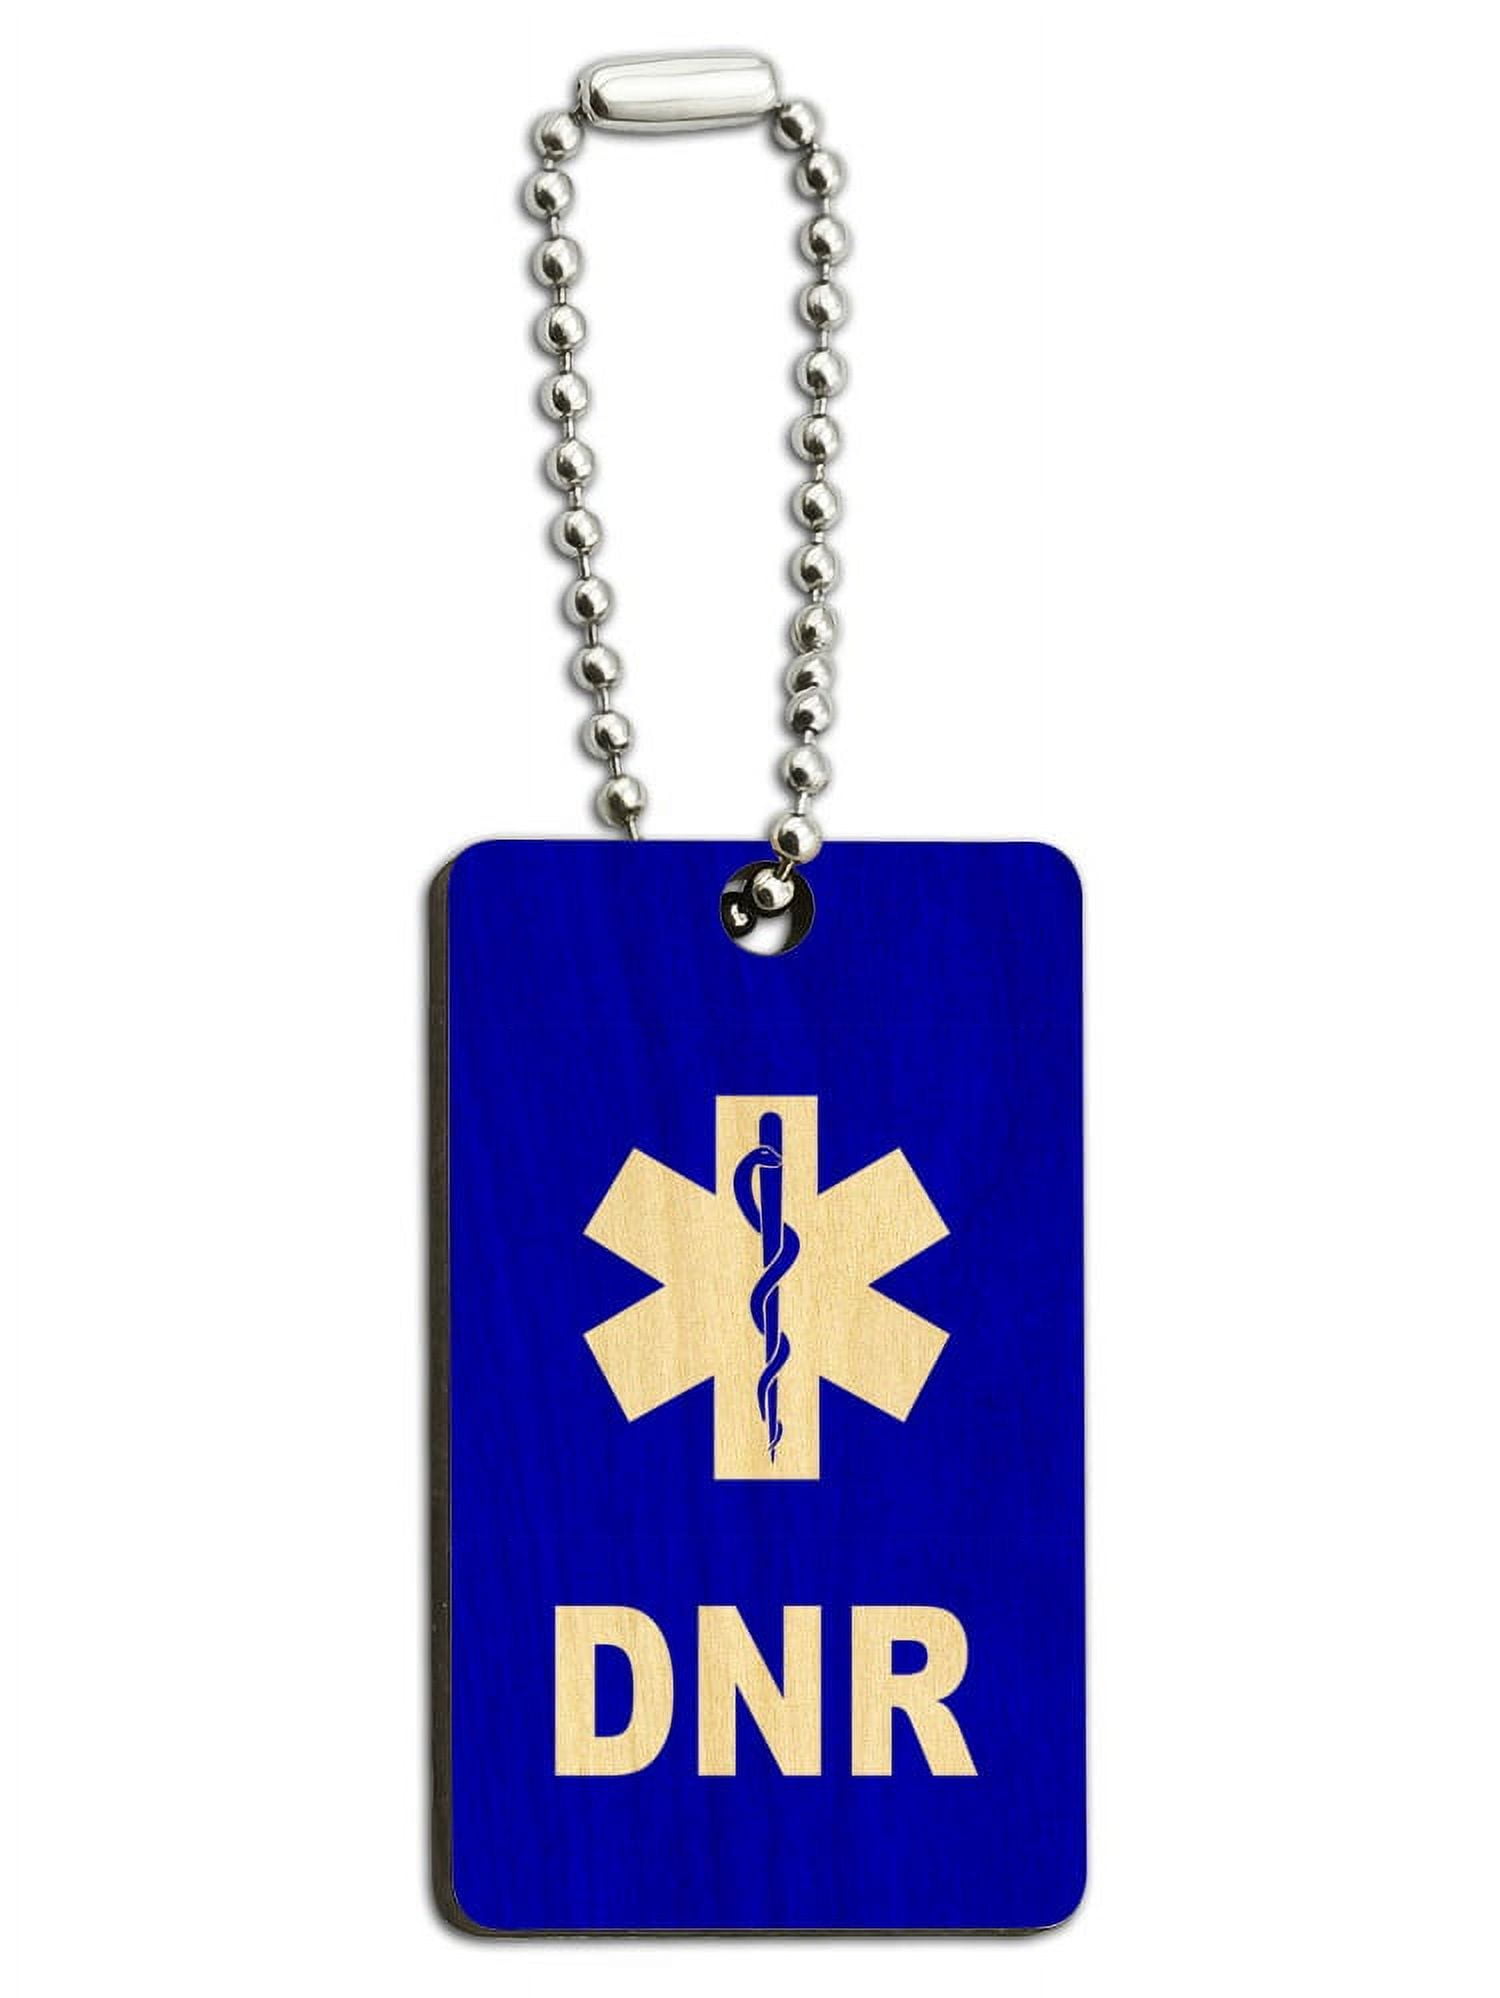 DNR Do Not Resuscitate - Medical Emergency - Star of Life Wood